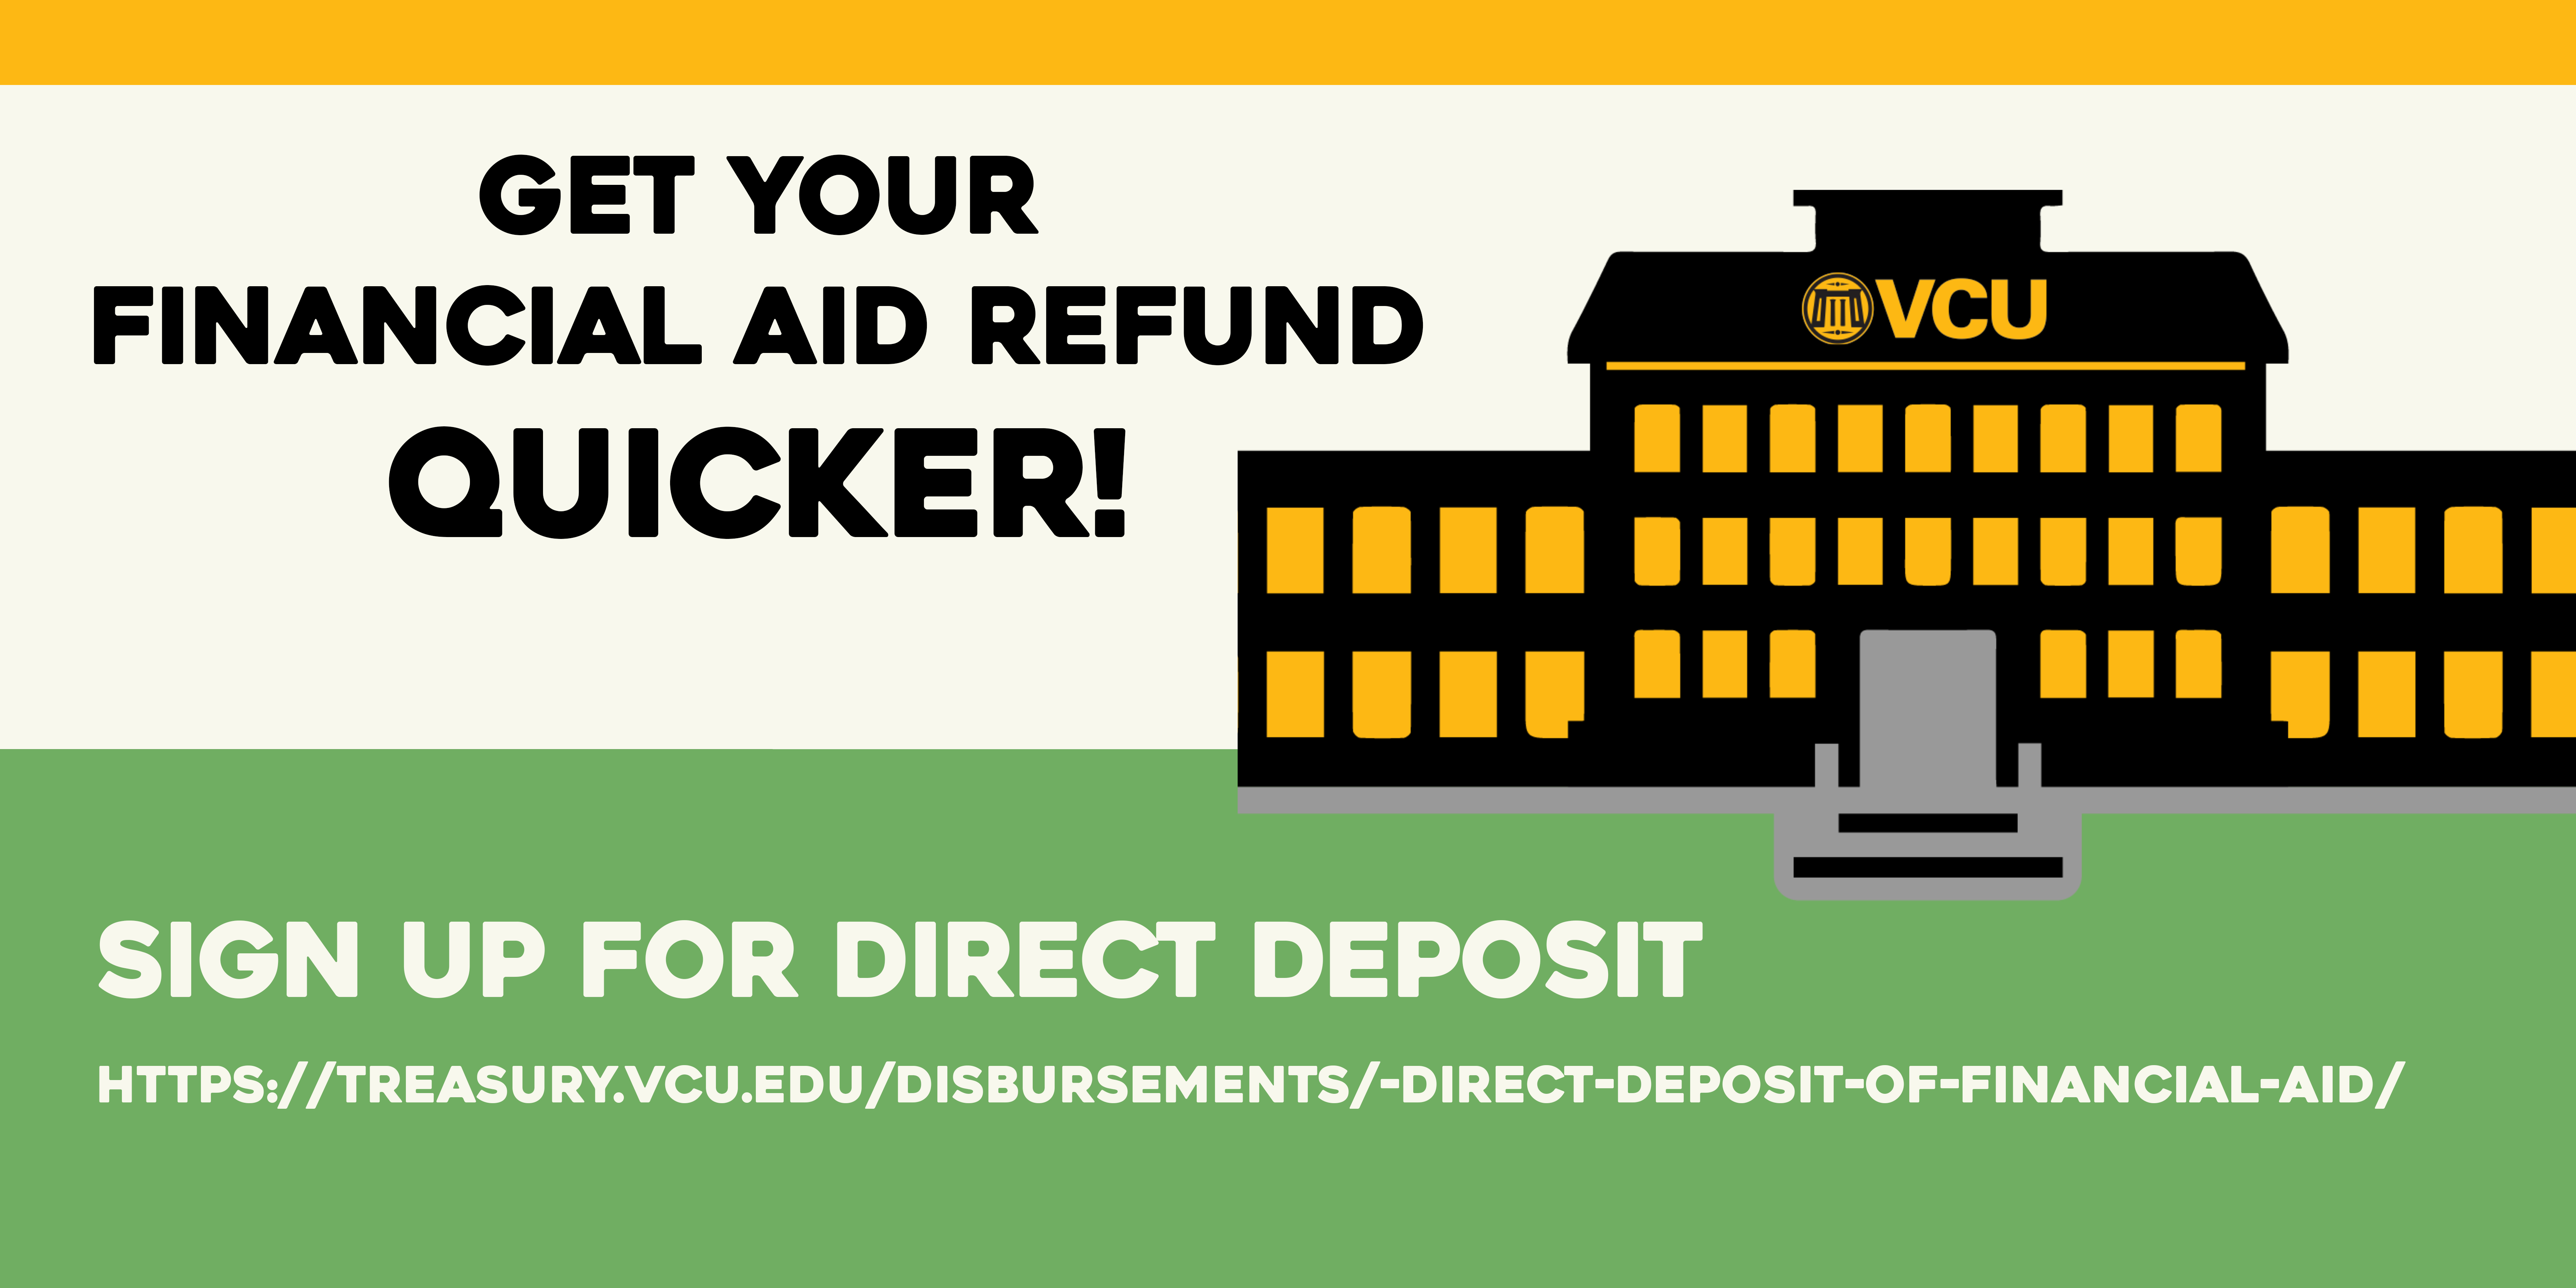 Sign up for direct deposit to receive your financial aid refund quicker! https://treasury.vcu.edu/forms/student-forms/